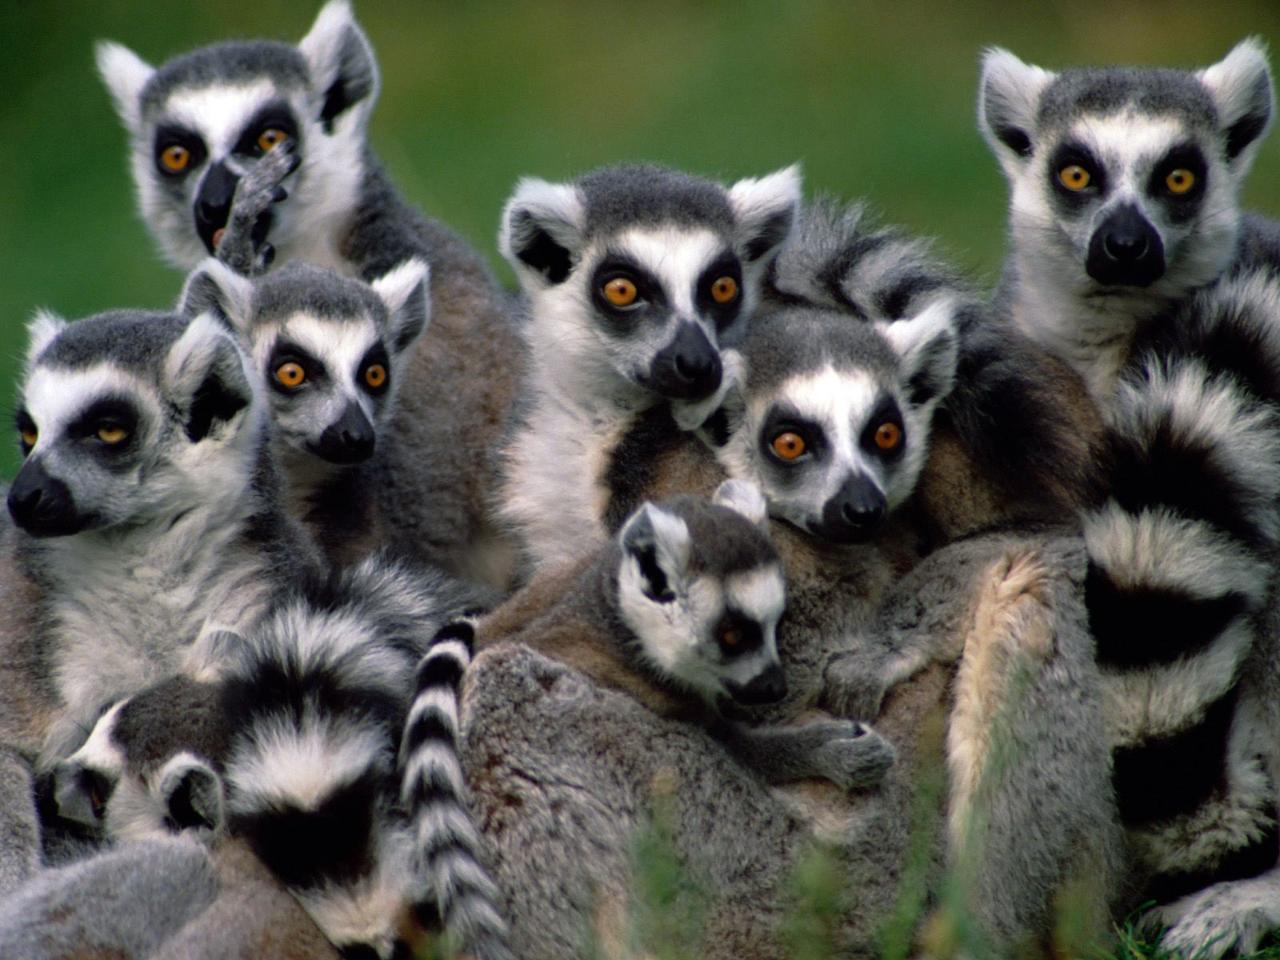 MTT Madagascar Group Tour - 15 Days - Includes Domestic Flight and All Food Except Lunches - South - English